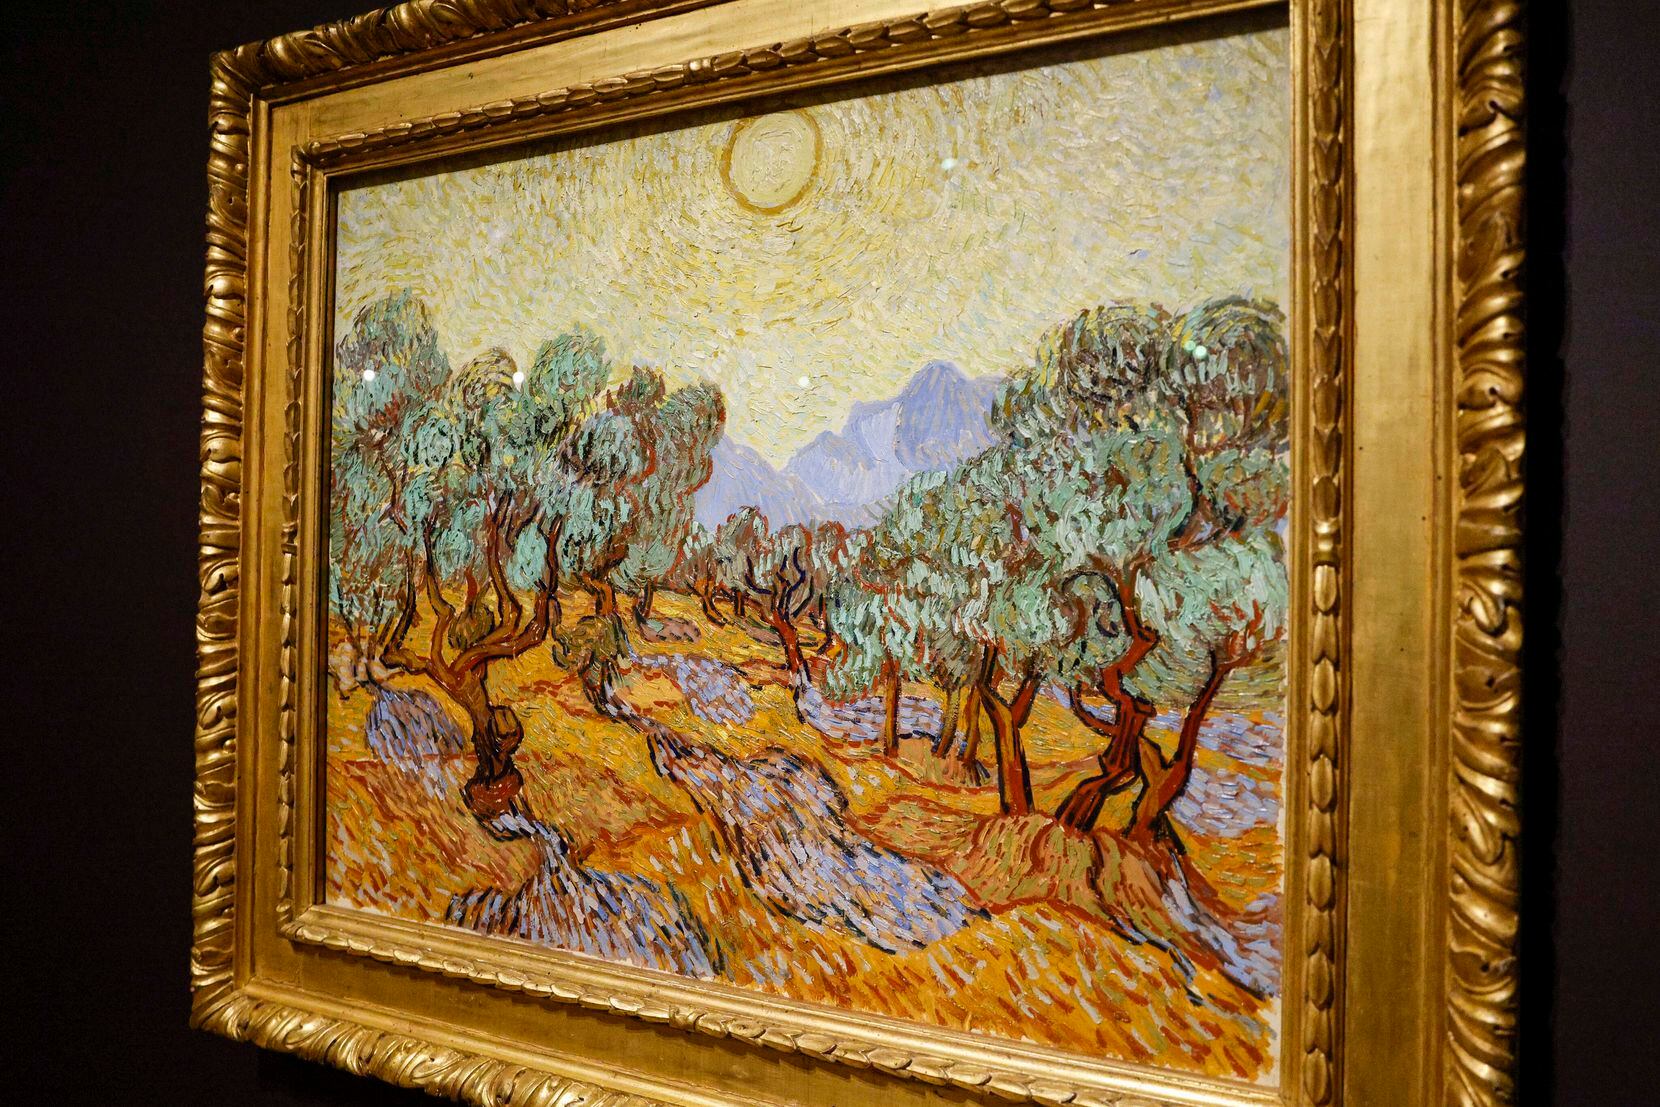 Van Gogh also shows a rarer sunny scene in "Olive Trees" from November 1889, on loan from...